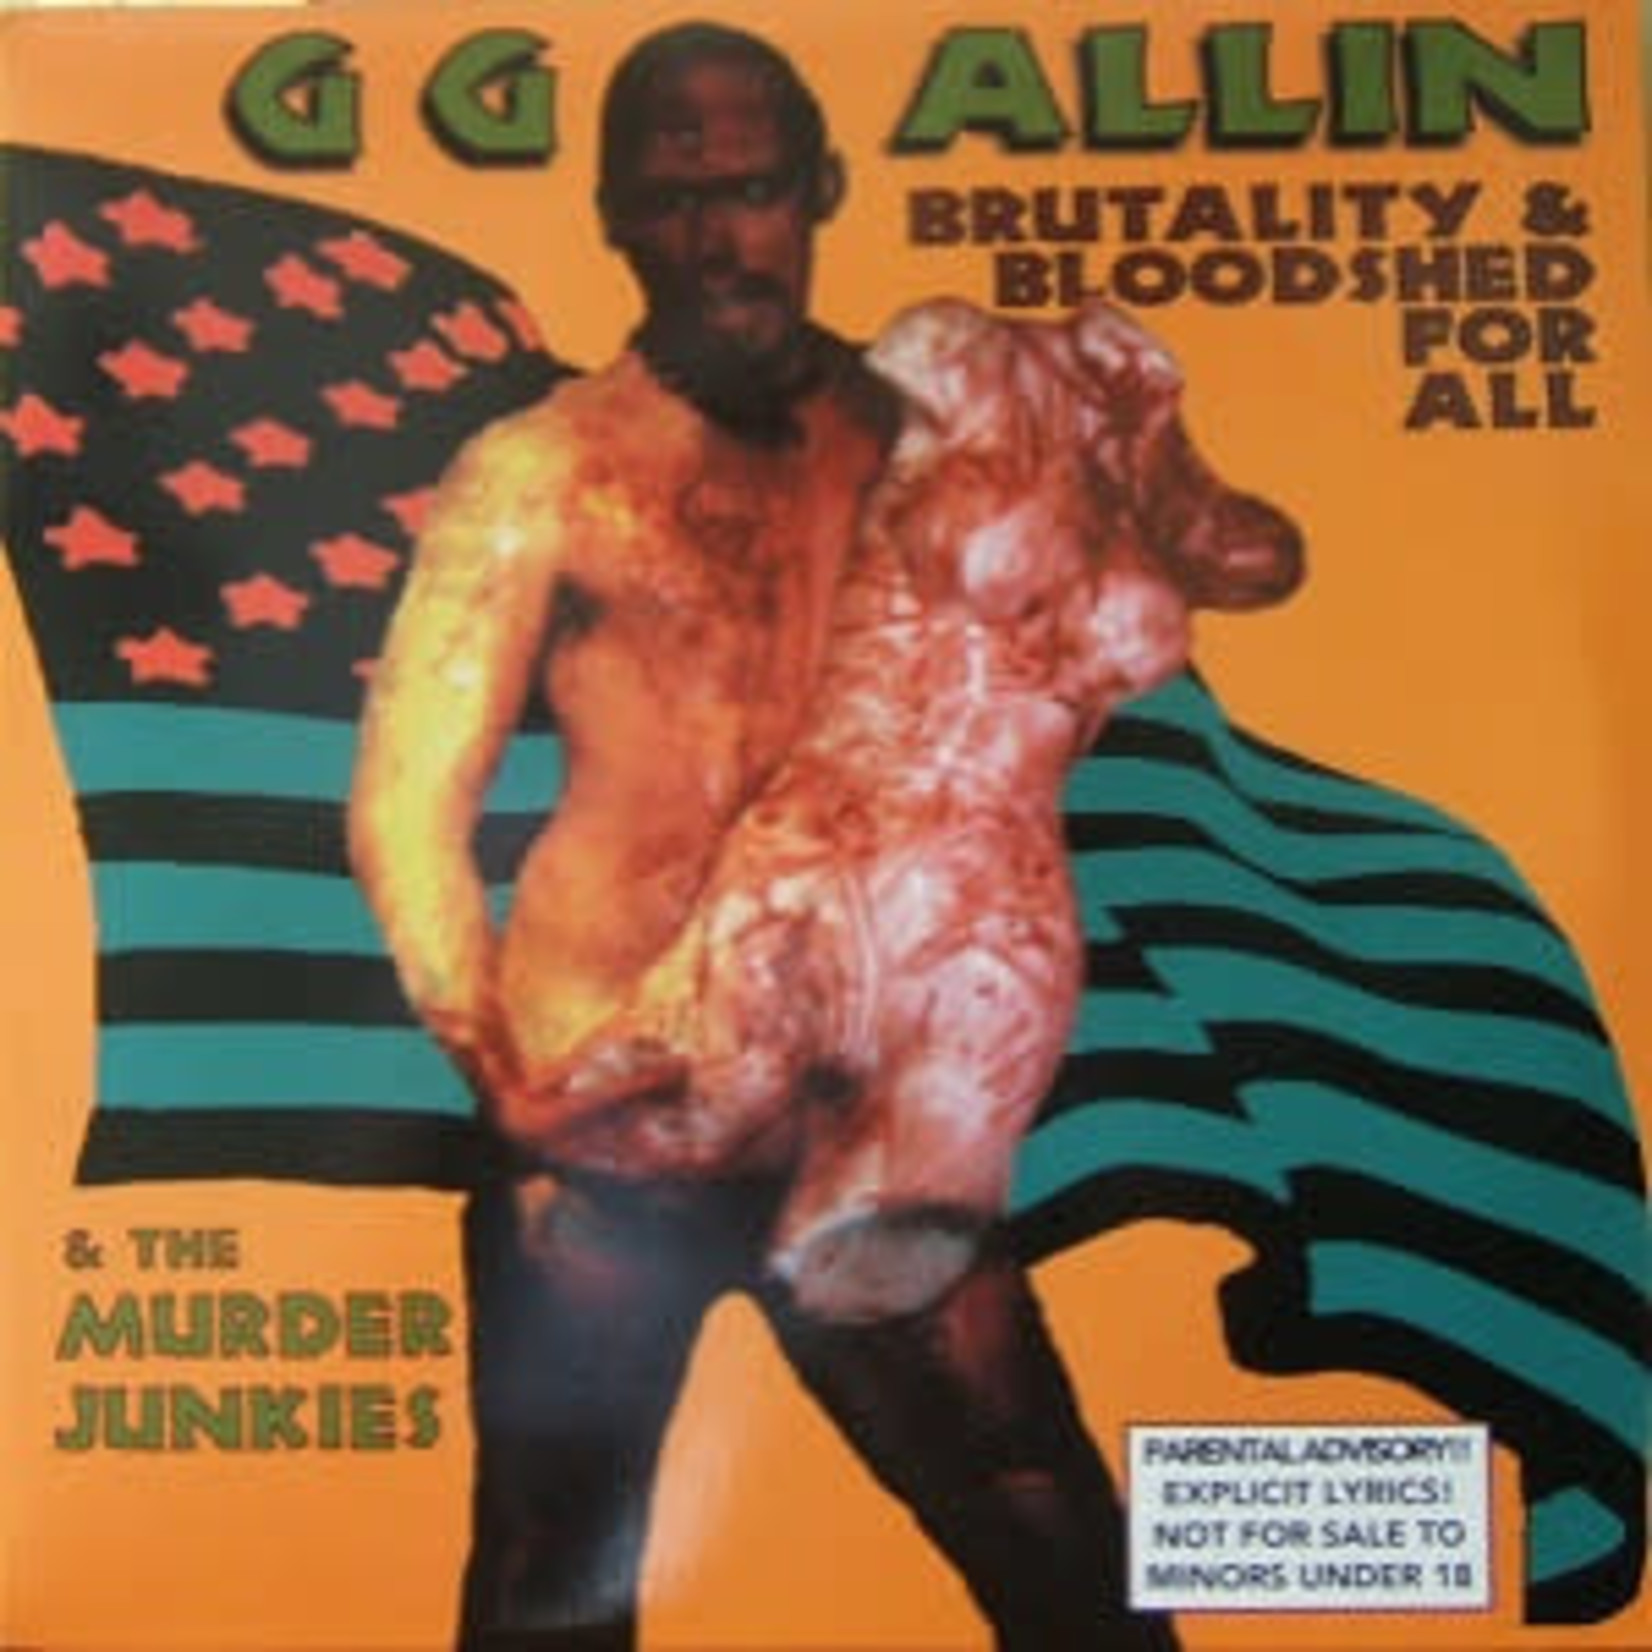 G.G. Allin - Brutality And Bloodshed For All [LP]